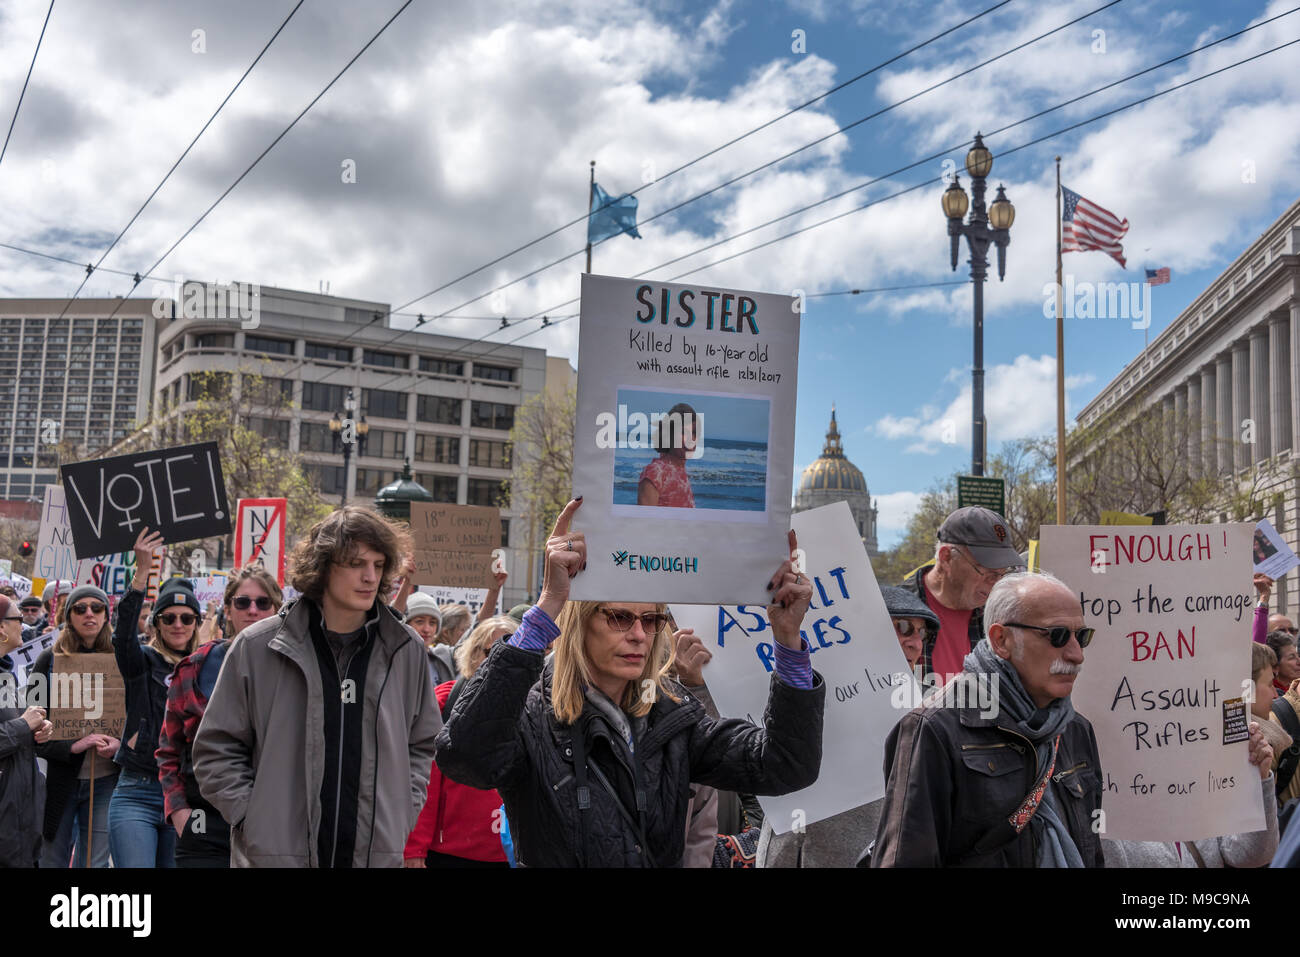 San Francisco, USA. 24th March, 2018. March for Our Lives rally and march to call for gun control and end gun violence; a woman marches carrying a sign that reads 'Sister killed by a 16-year-old with assault rifle 12/31/17' and ends with the hashtag #Enough (enough). Shelly Rivoli/Alamy Live News Stock Photo